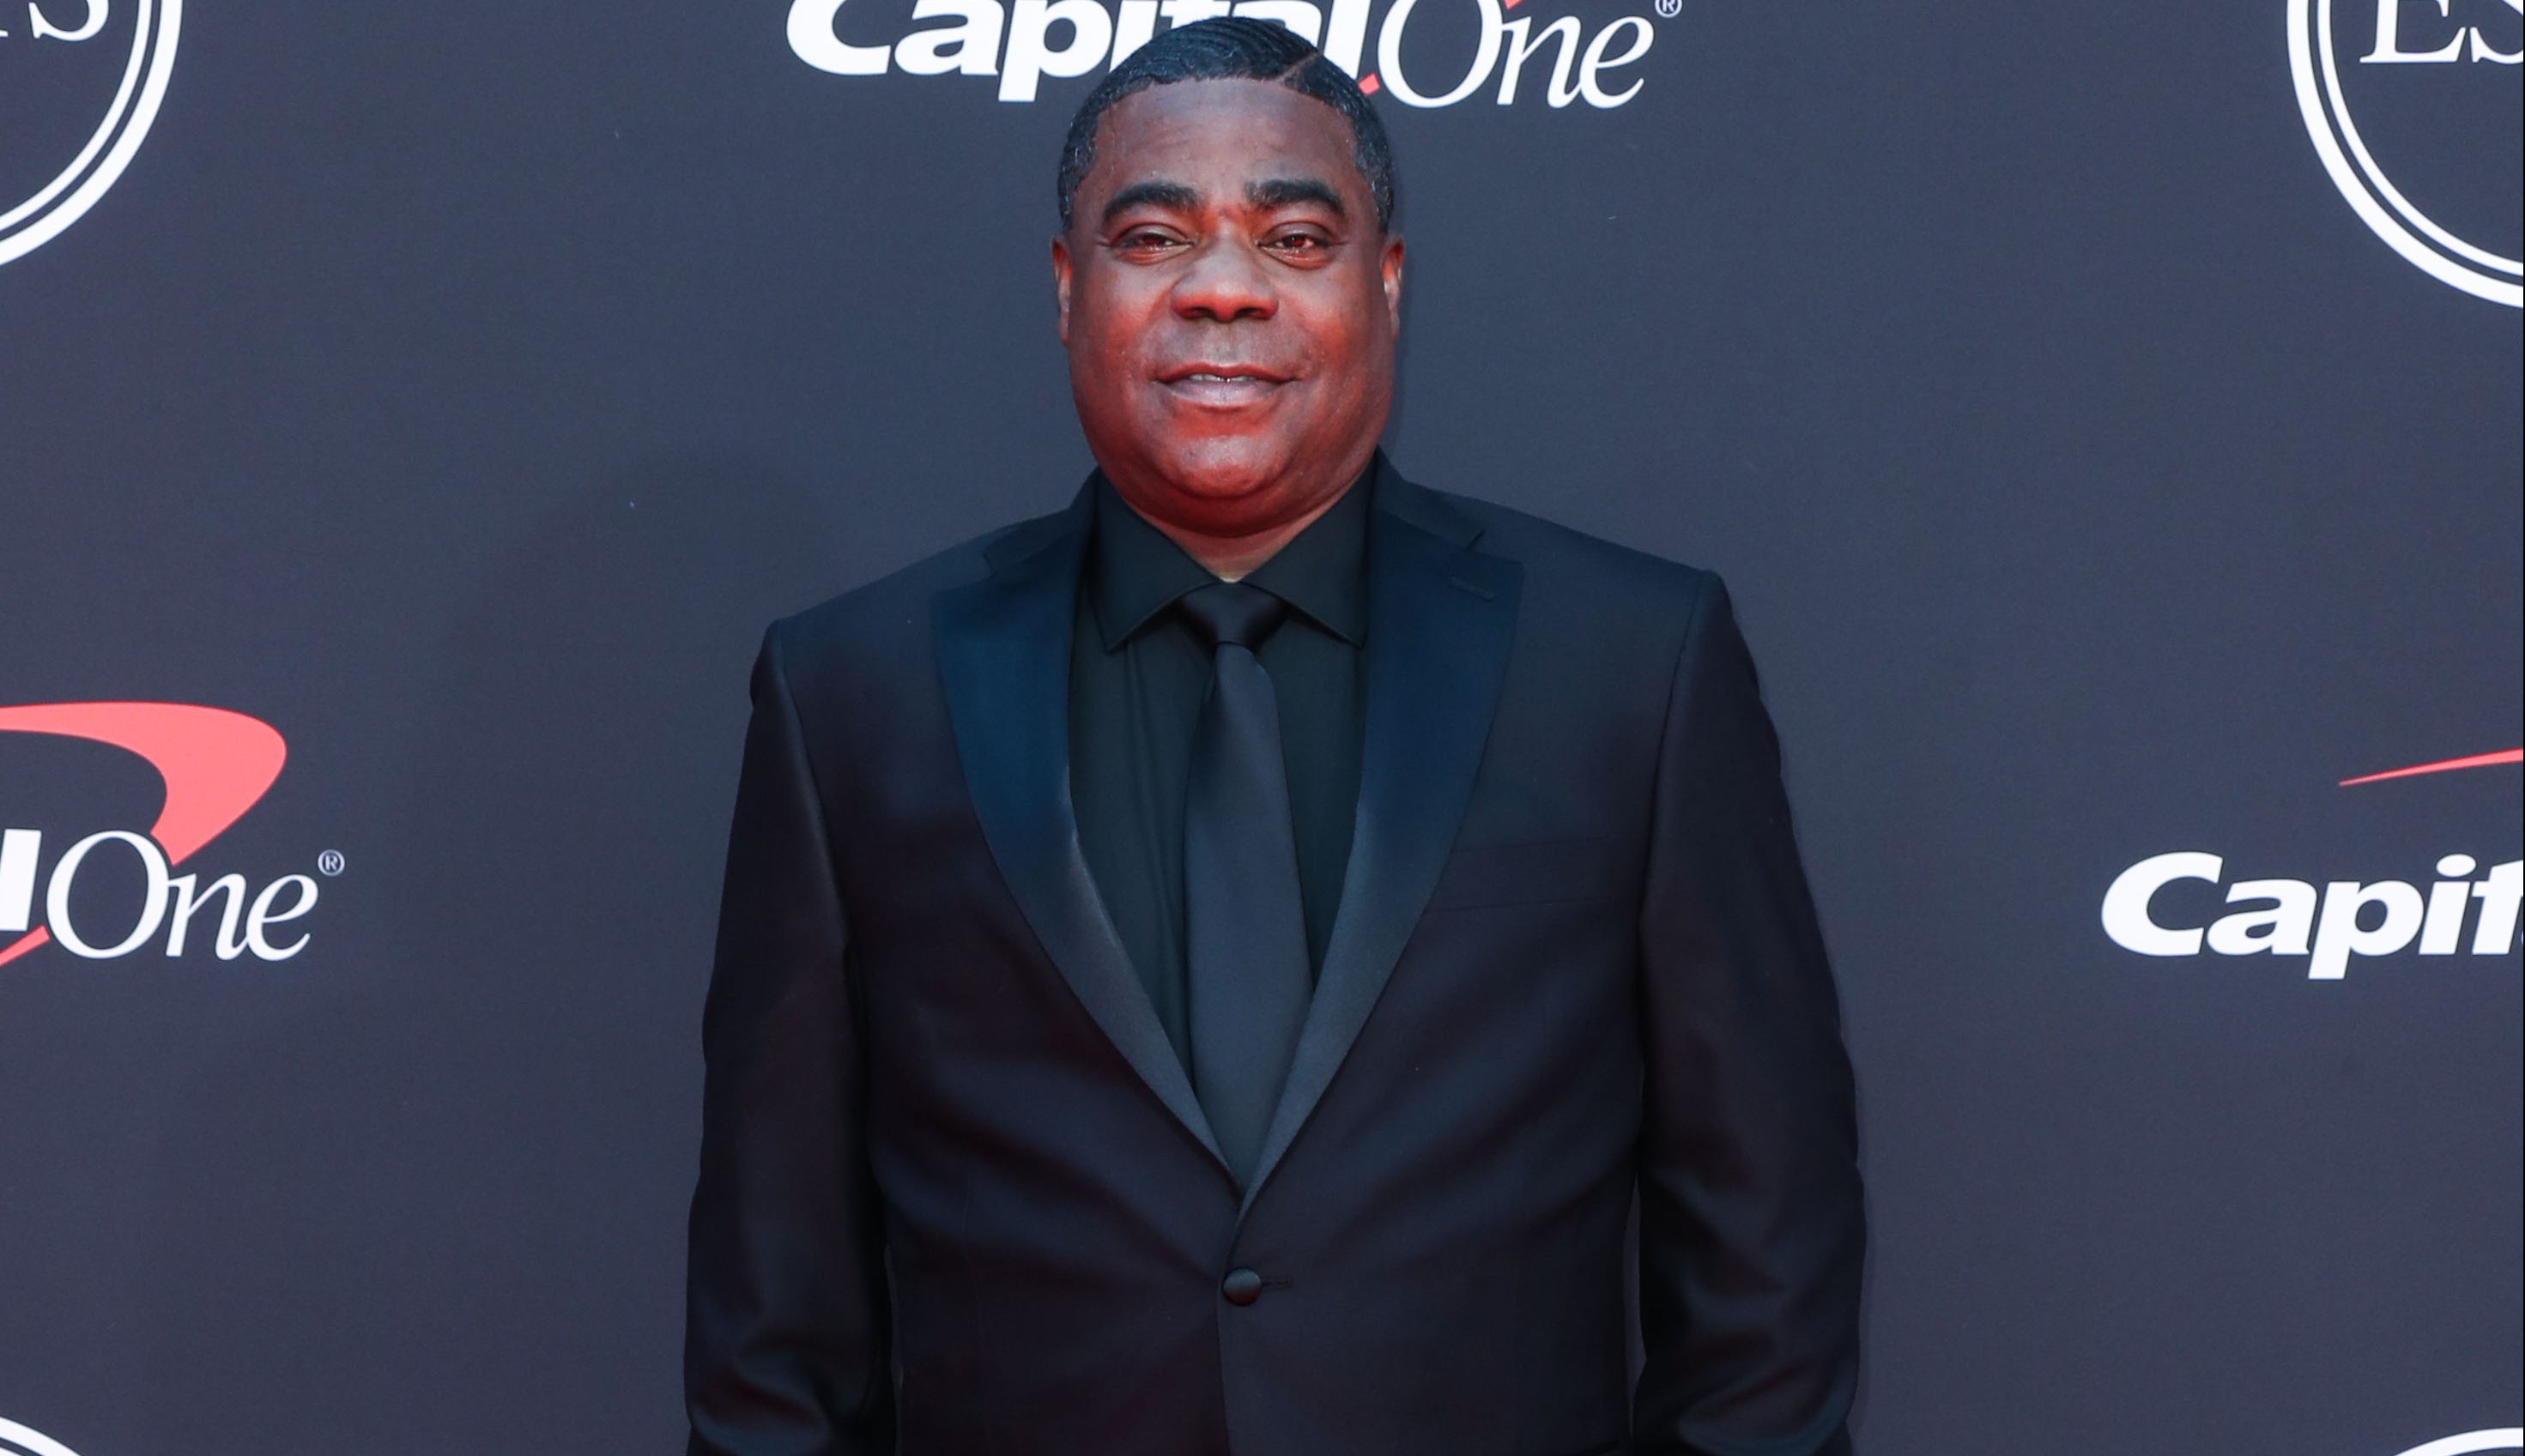 Actor Tracy Morgan arrives at the 2019 ESPY Awards held at Microsoft Theater L.A. Live on July 10, 2019 in Los Angeles, California, United States. (Photo by Xavier Collin/Image Press Agency)